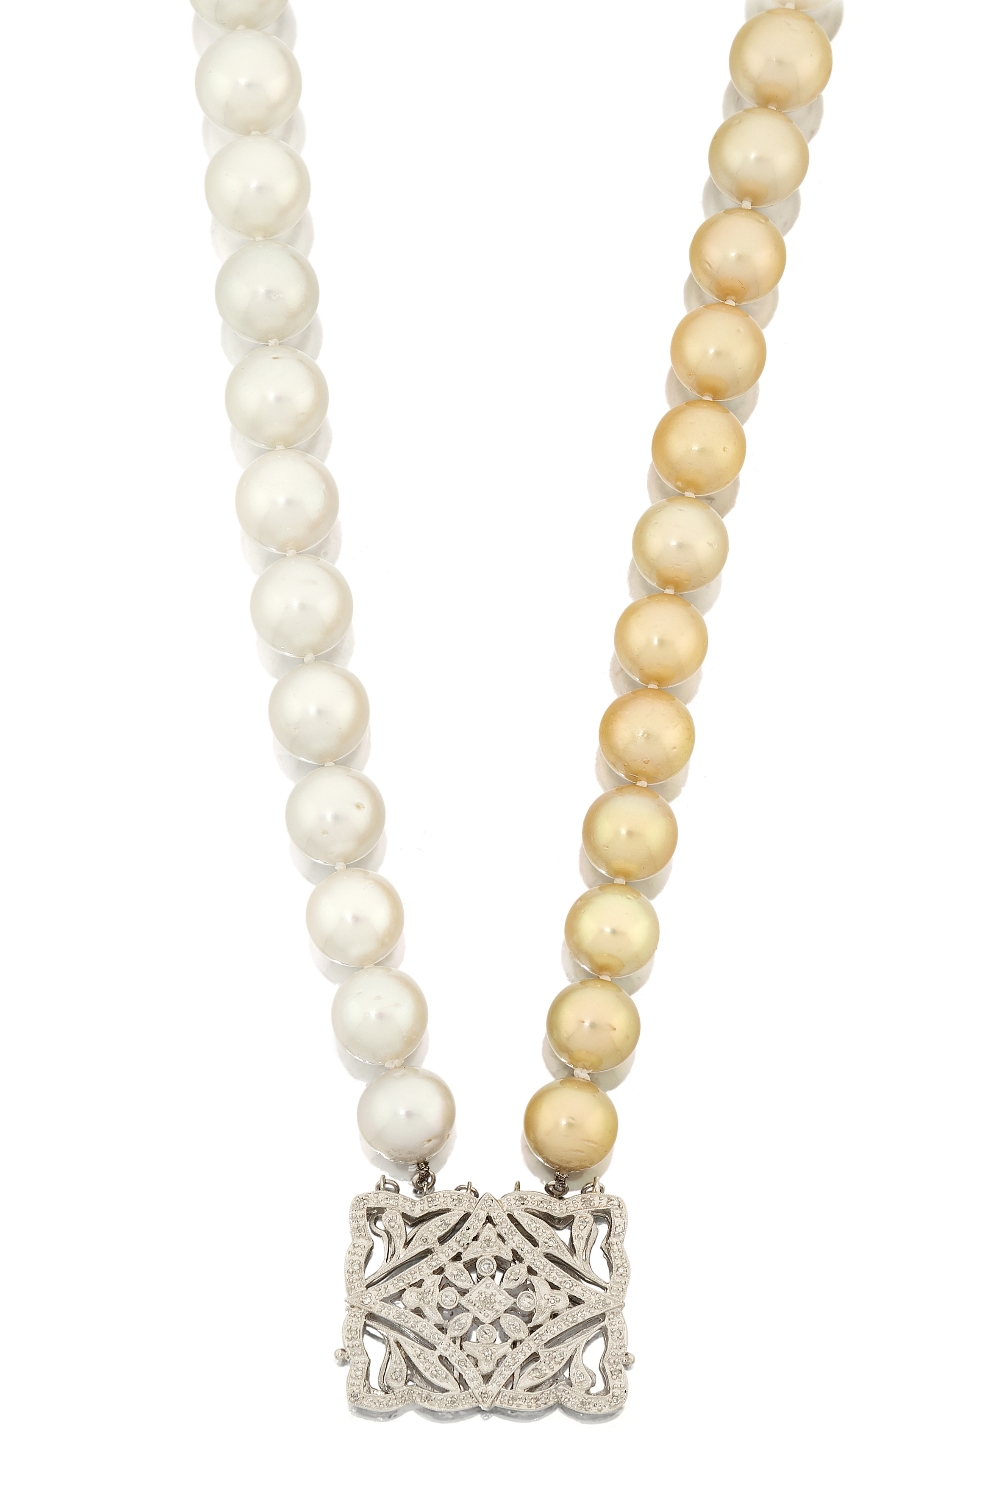 A two-colour South Sea cultured pearl and diamond two row choker necklace, composed of one row of